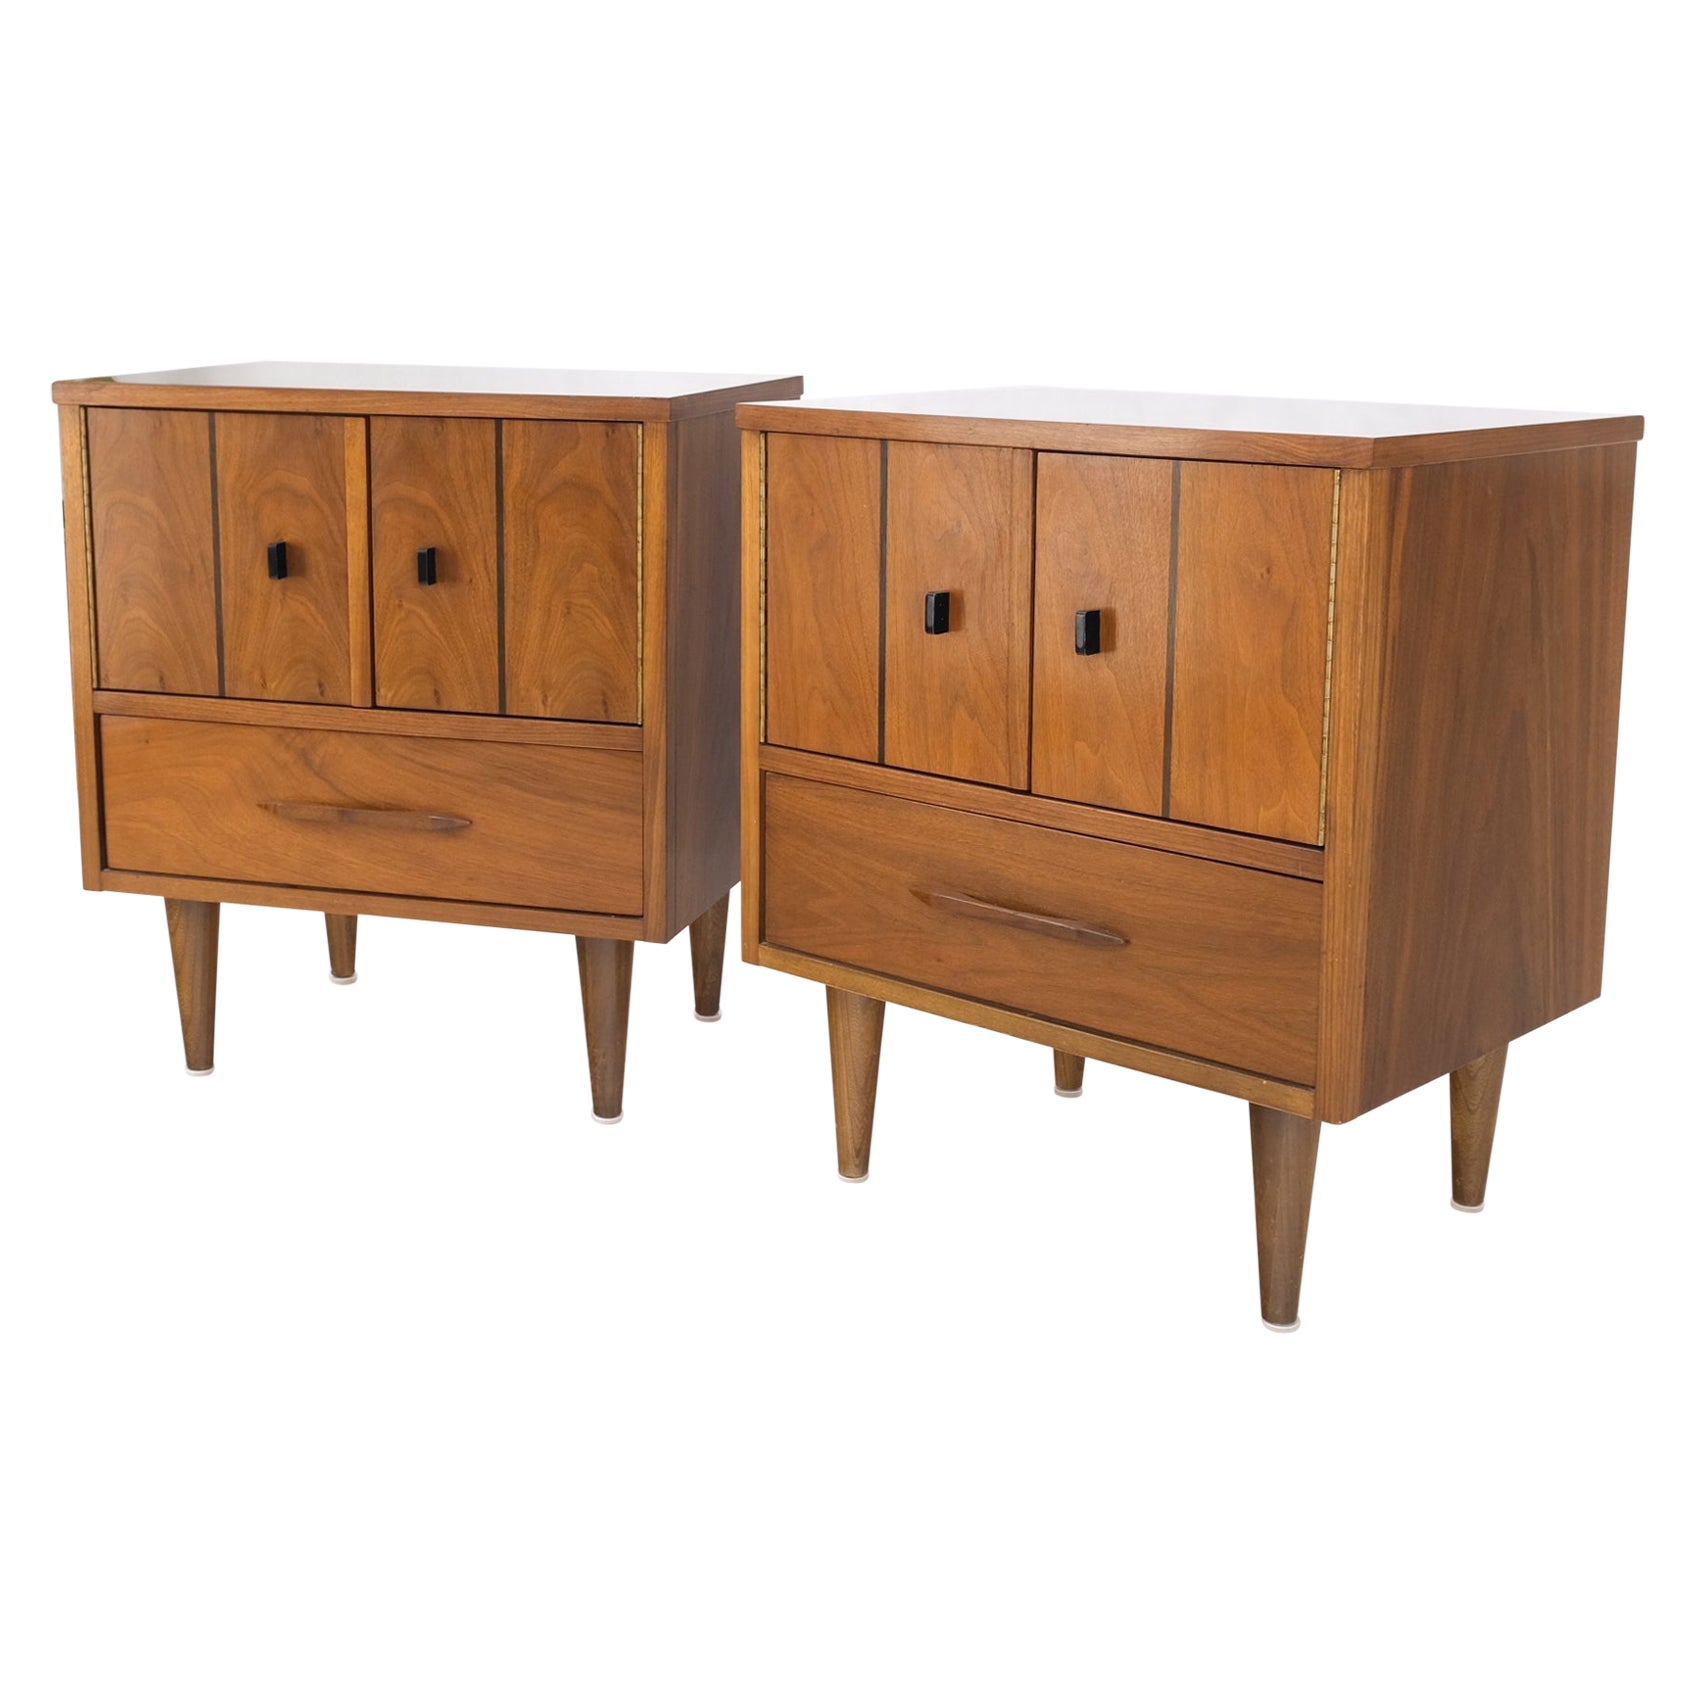 Light Walnut Double Door Compartment One Drawer Cone Tapered Legs End Tables For Sale